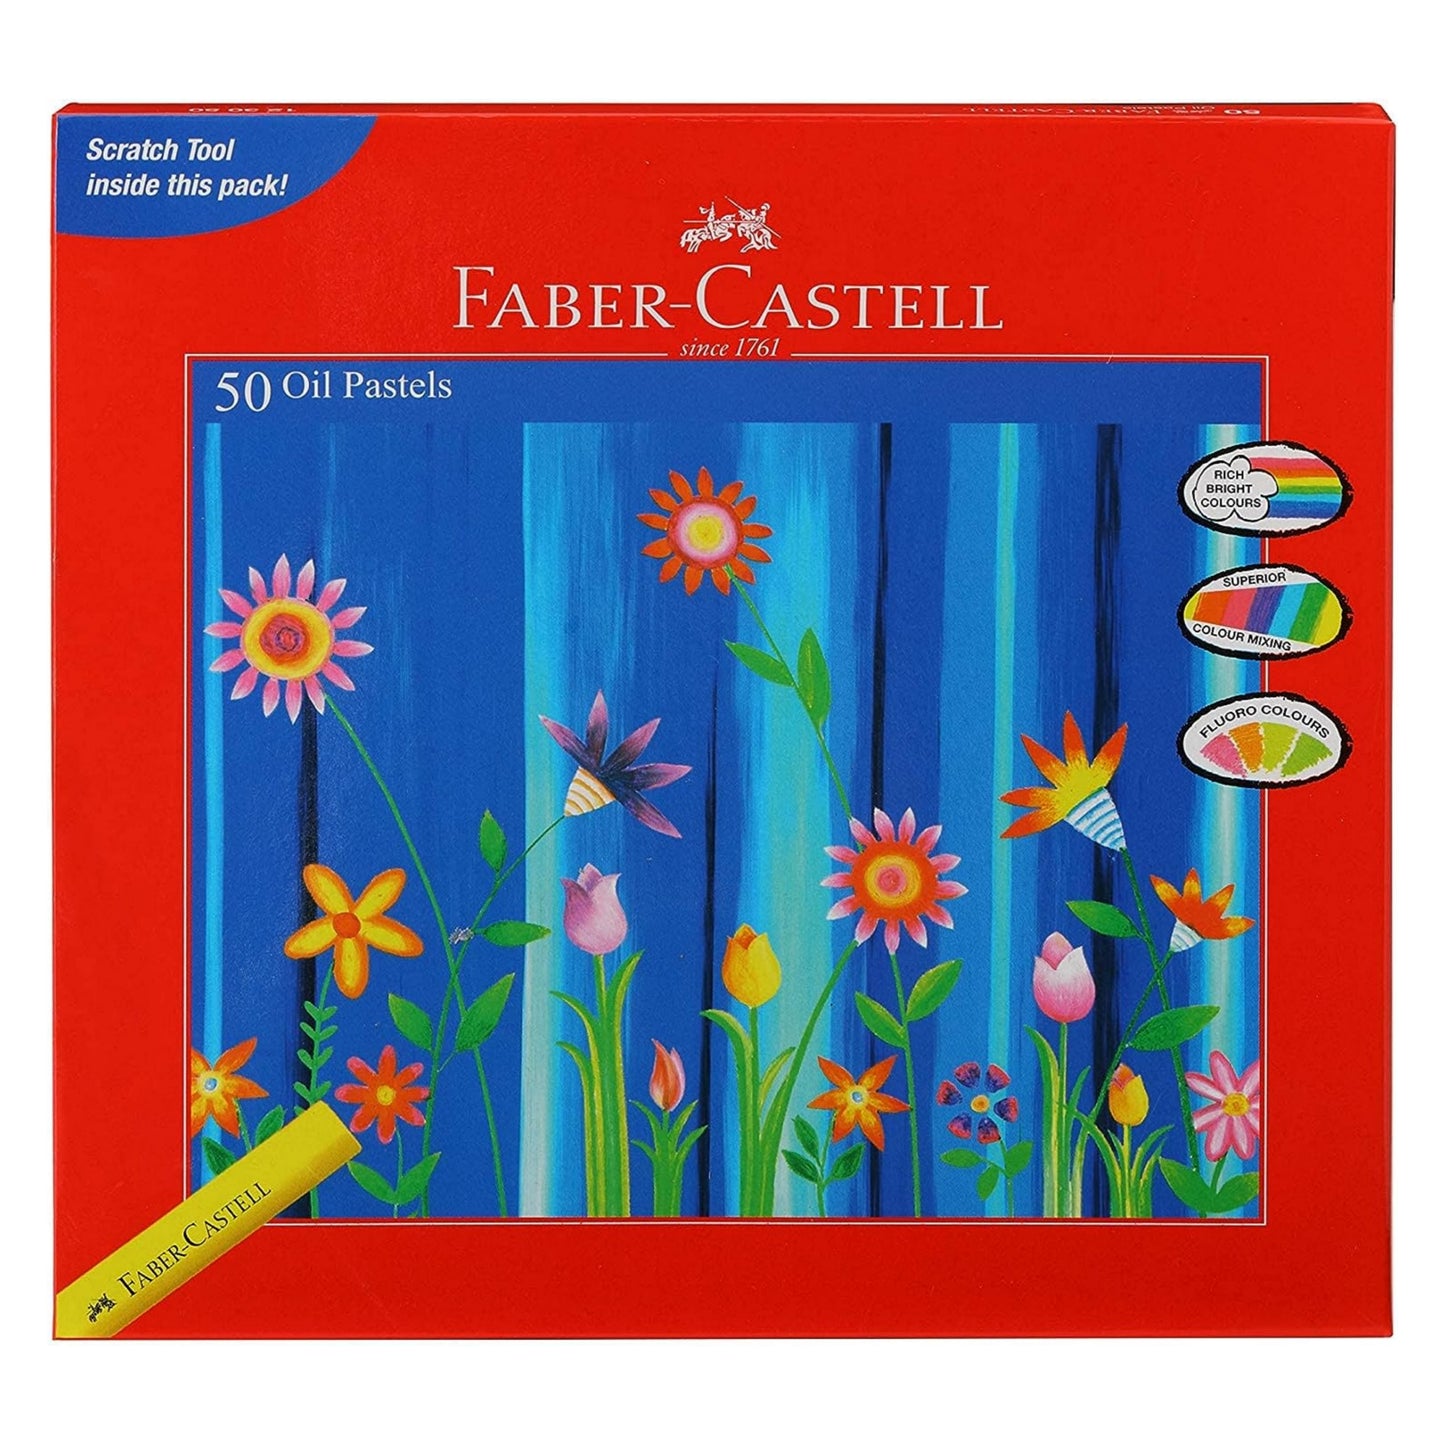 Faber-Castell Oil Pastels Pack Of 50